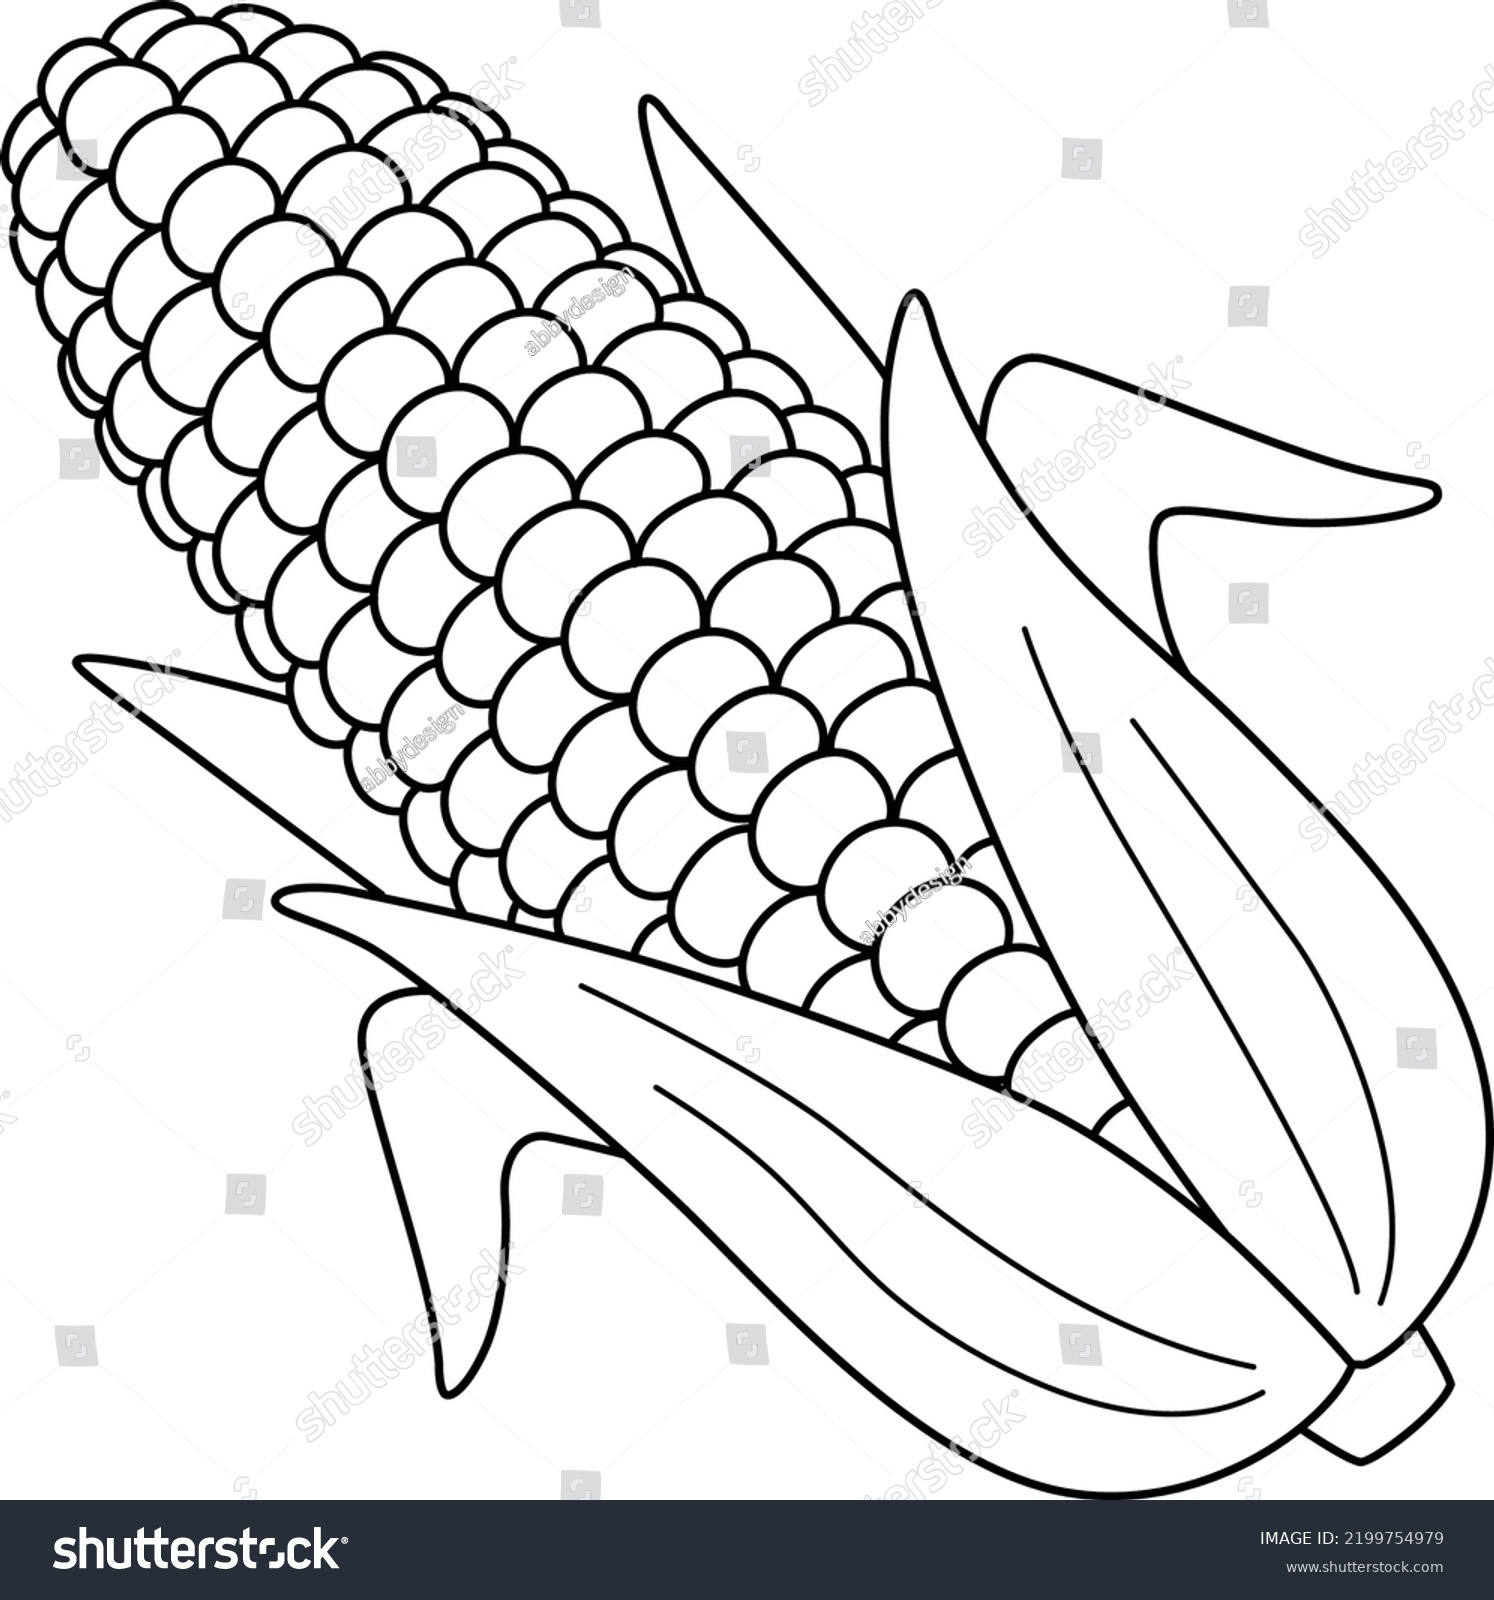 Corn fruit isolated coloring page kids stock vector royalty free